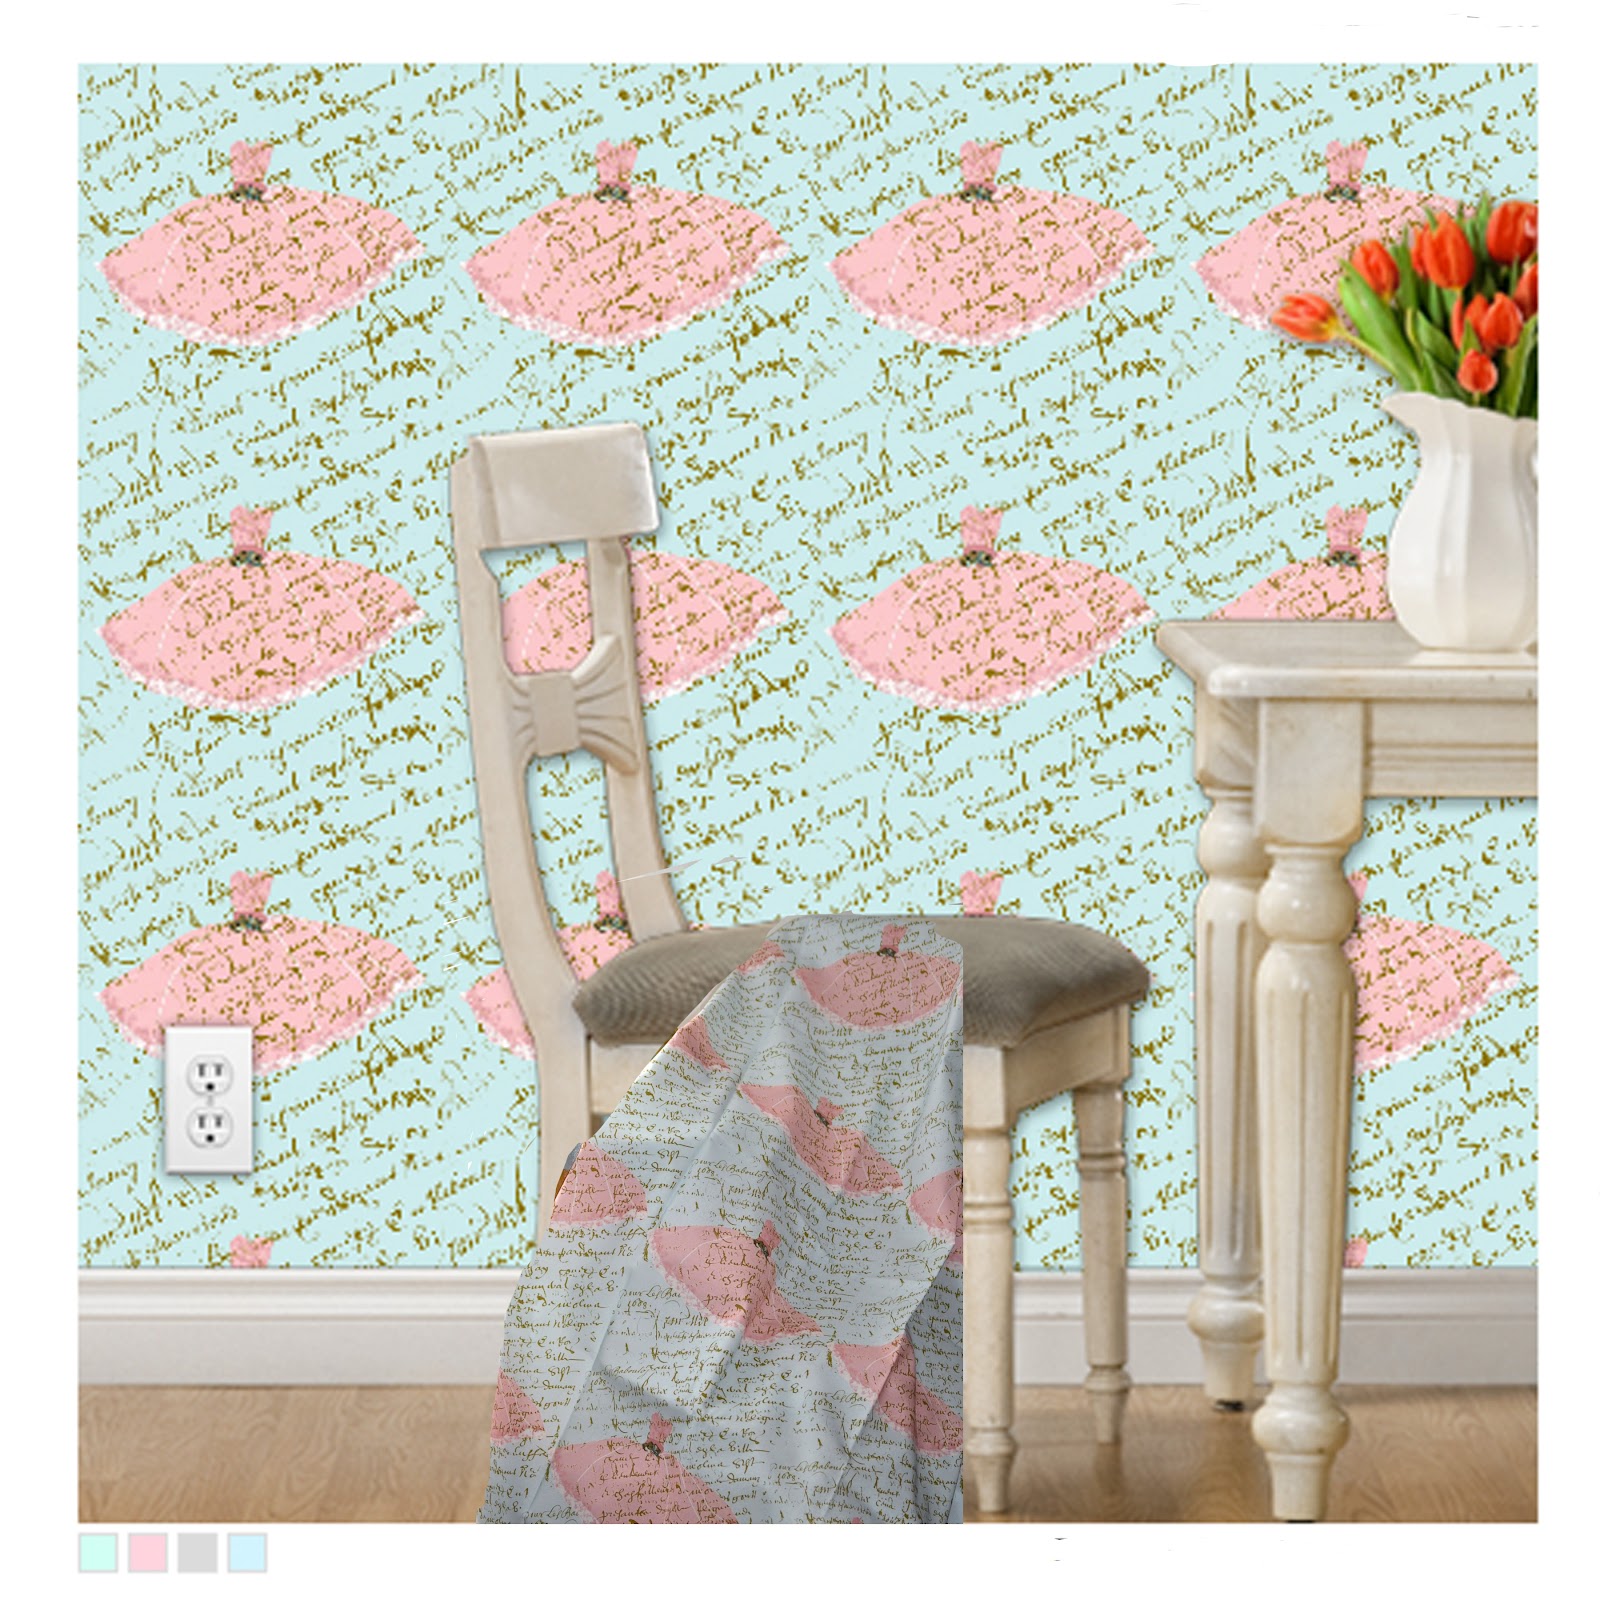 French Script Fabrics Fabric Wallpaper And Wall Art Decals